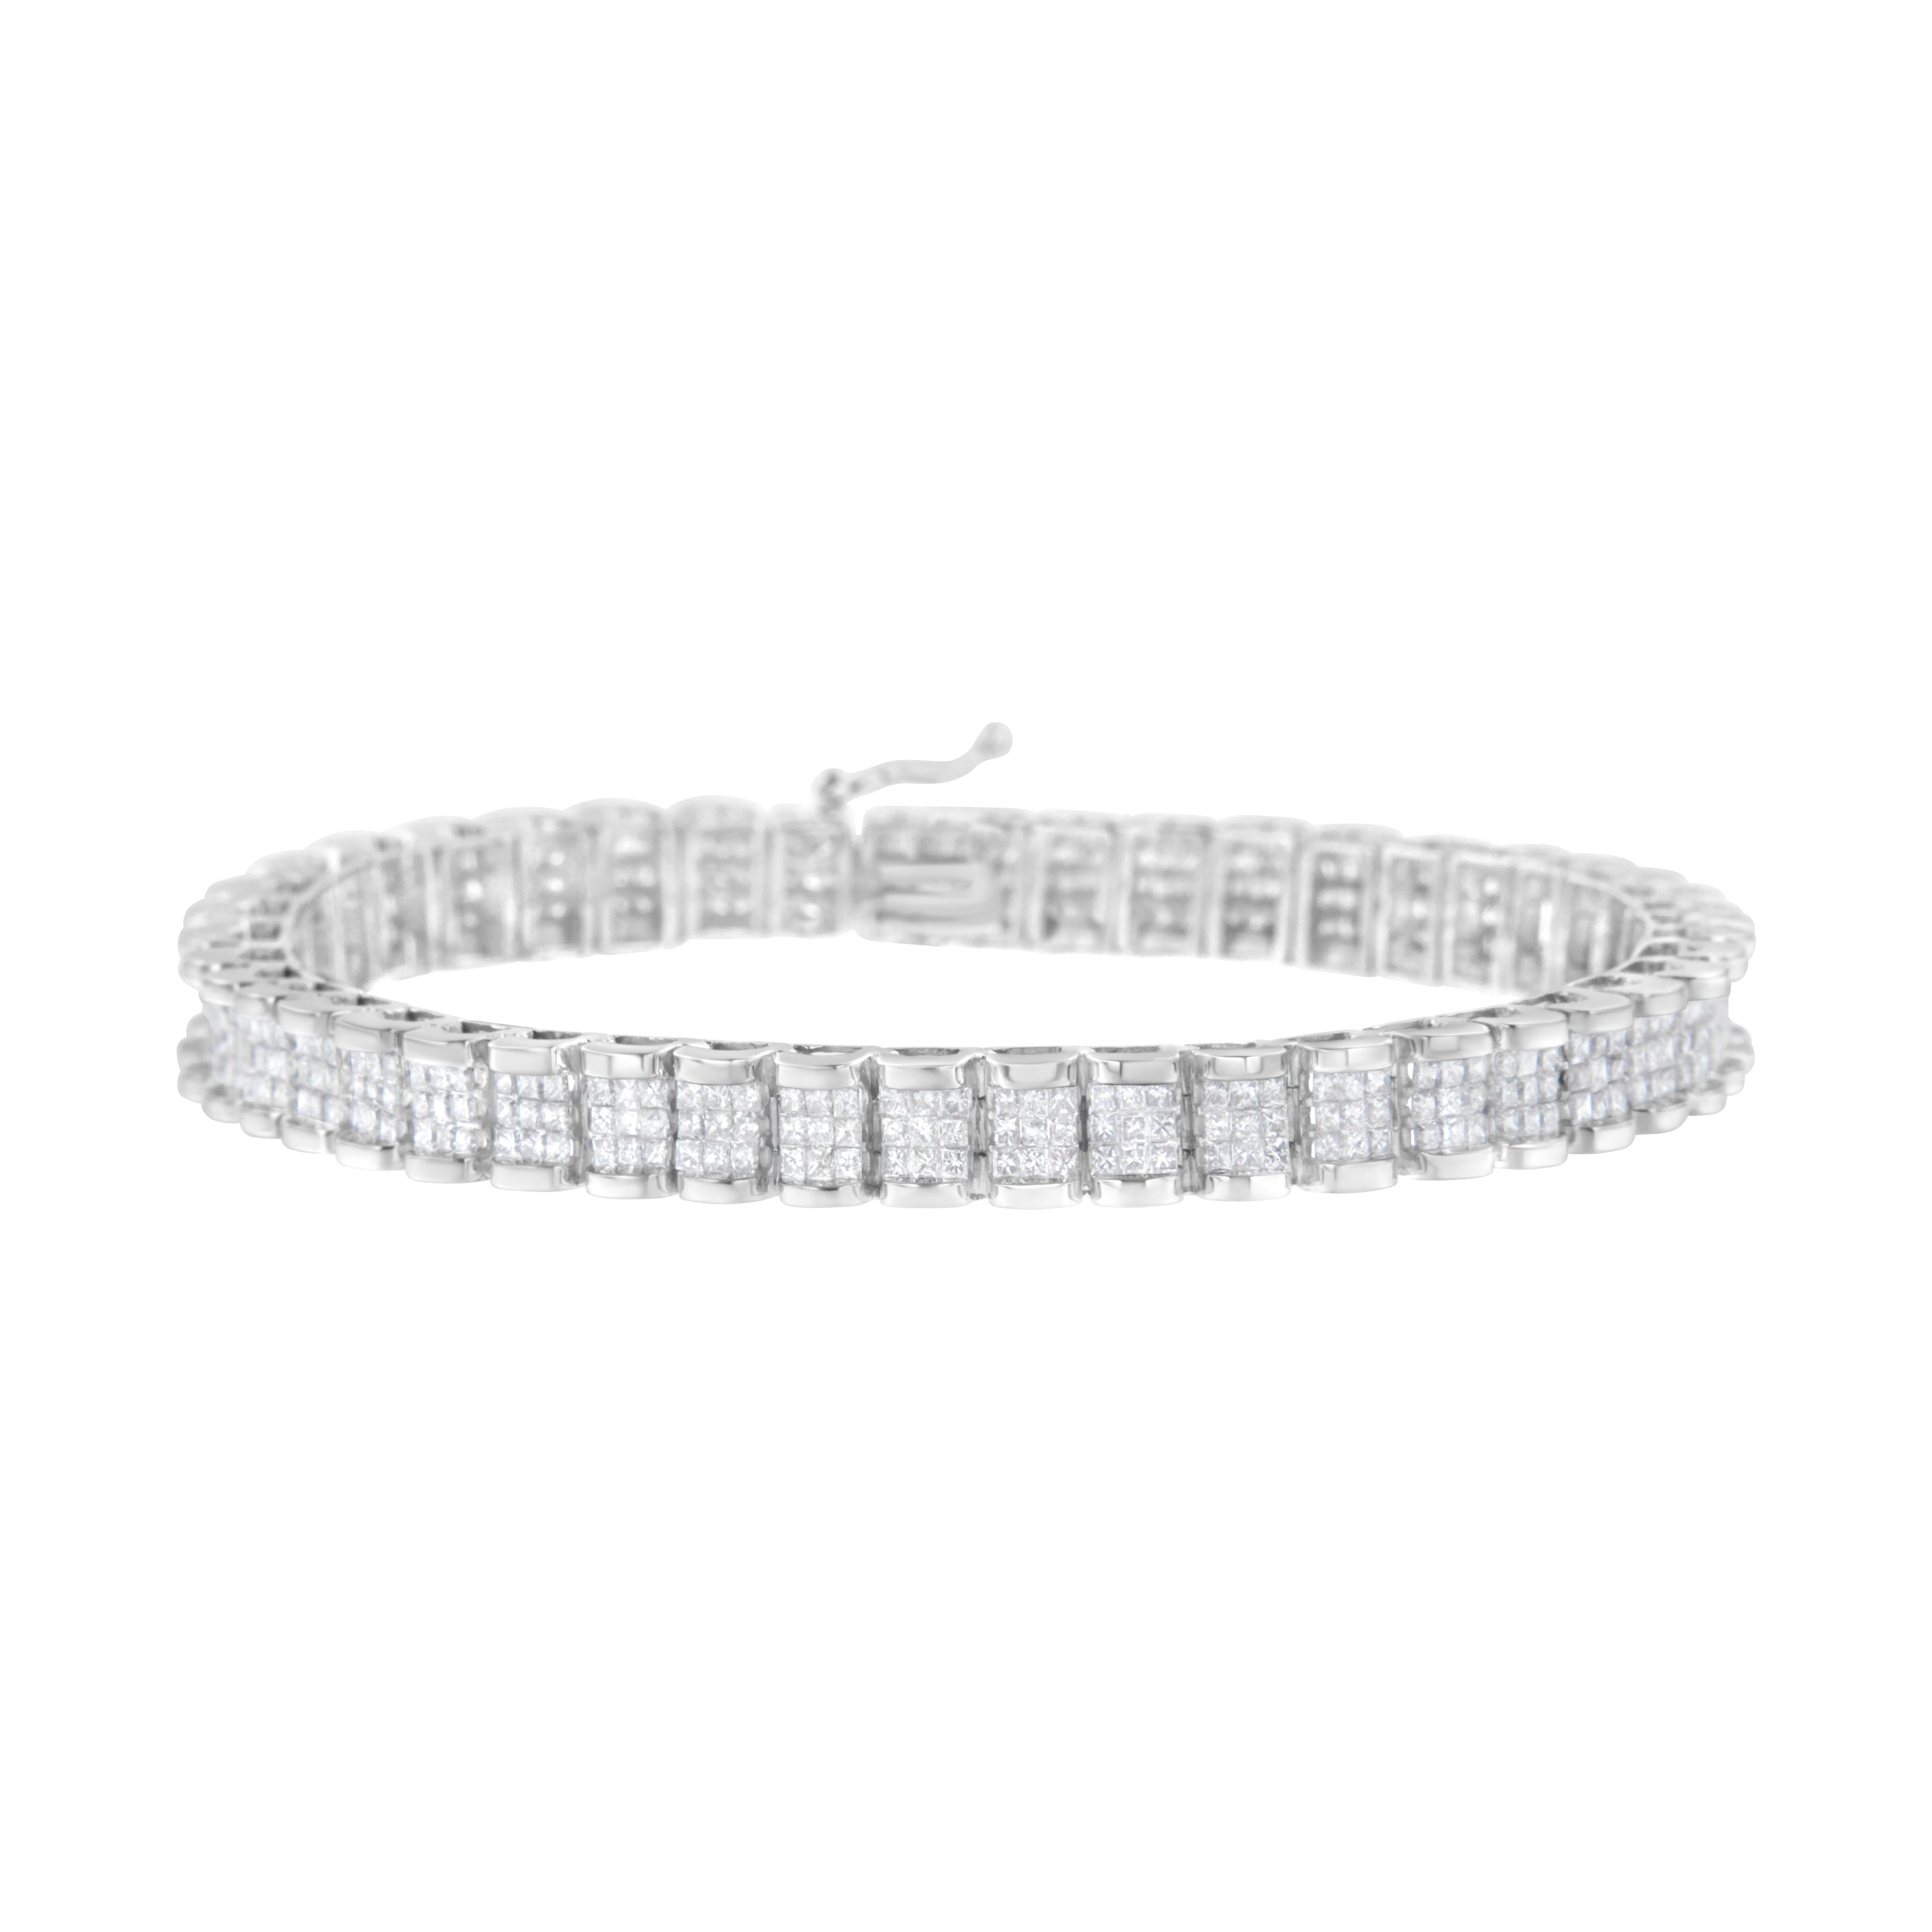 This stunning 14k white gold tennis bracelet is created with 5 ct of beautiful, natural diamonds. Rectangular links, each set with 12 princess-cut diamonds in an invisible setting, comprise the base of this design. This gorgeous piece will sparkle